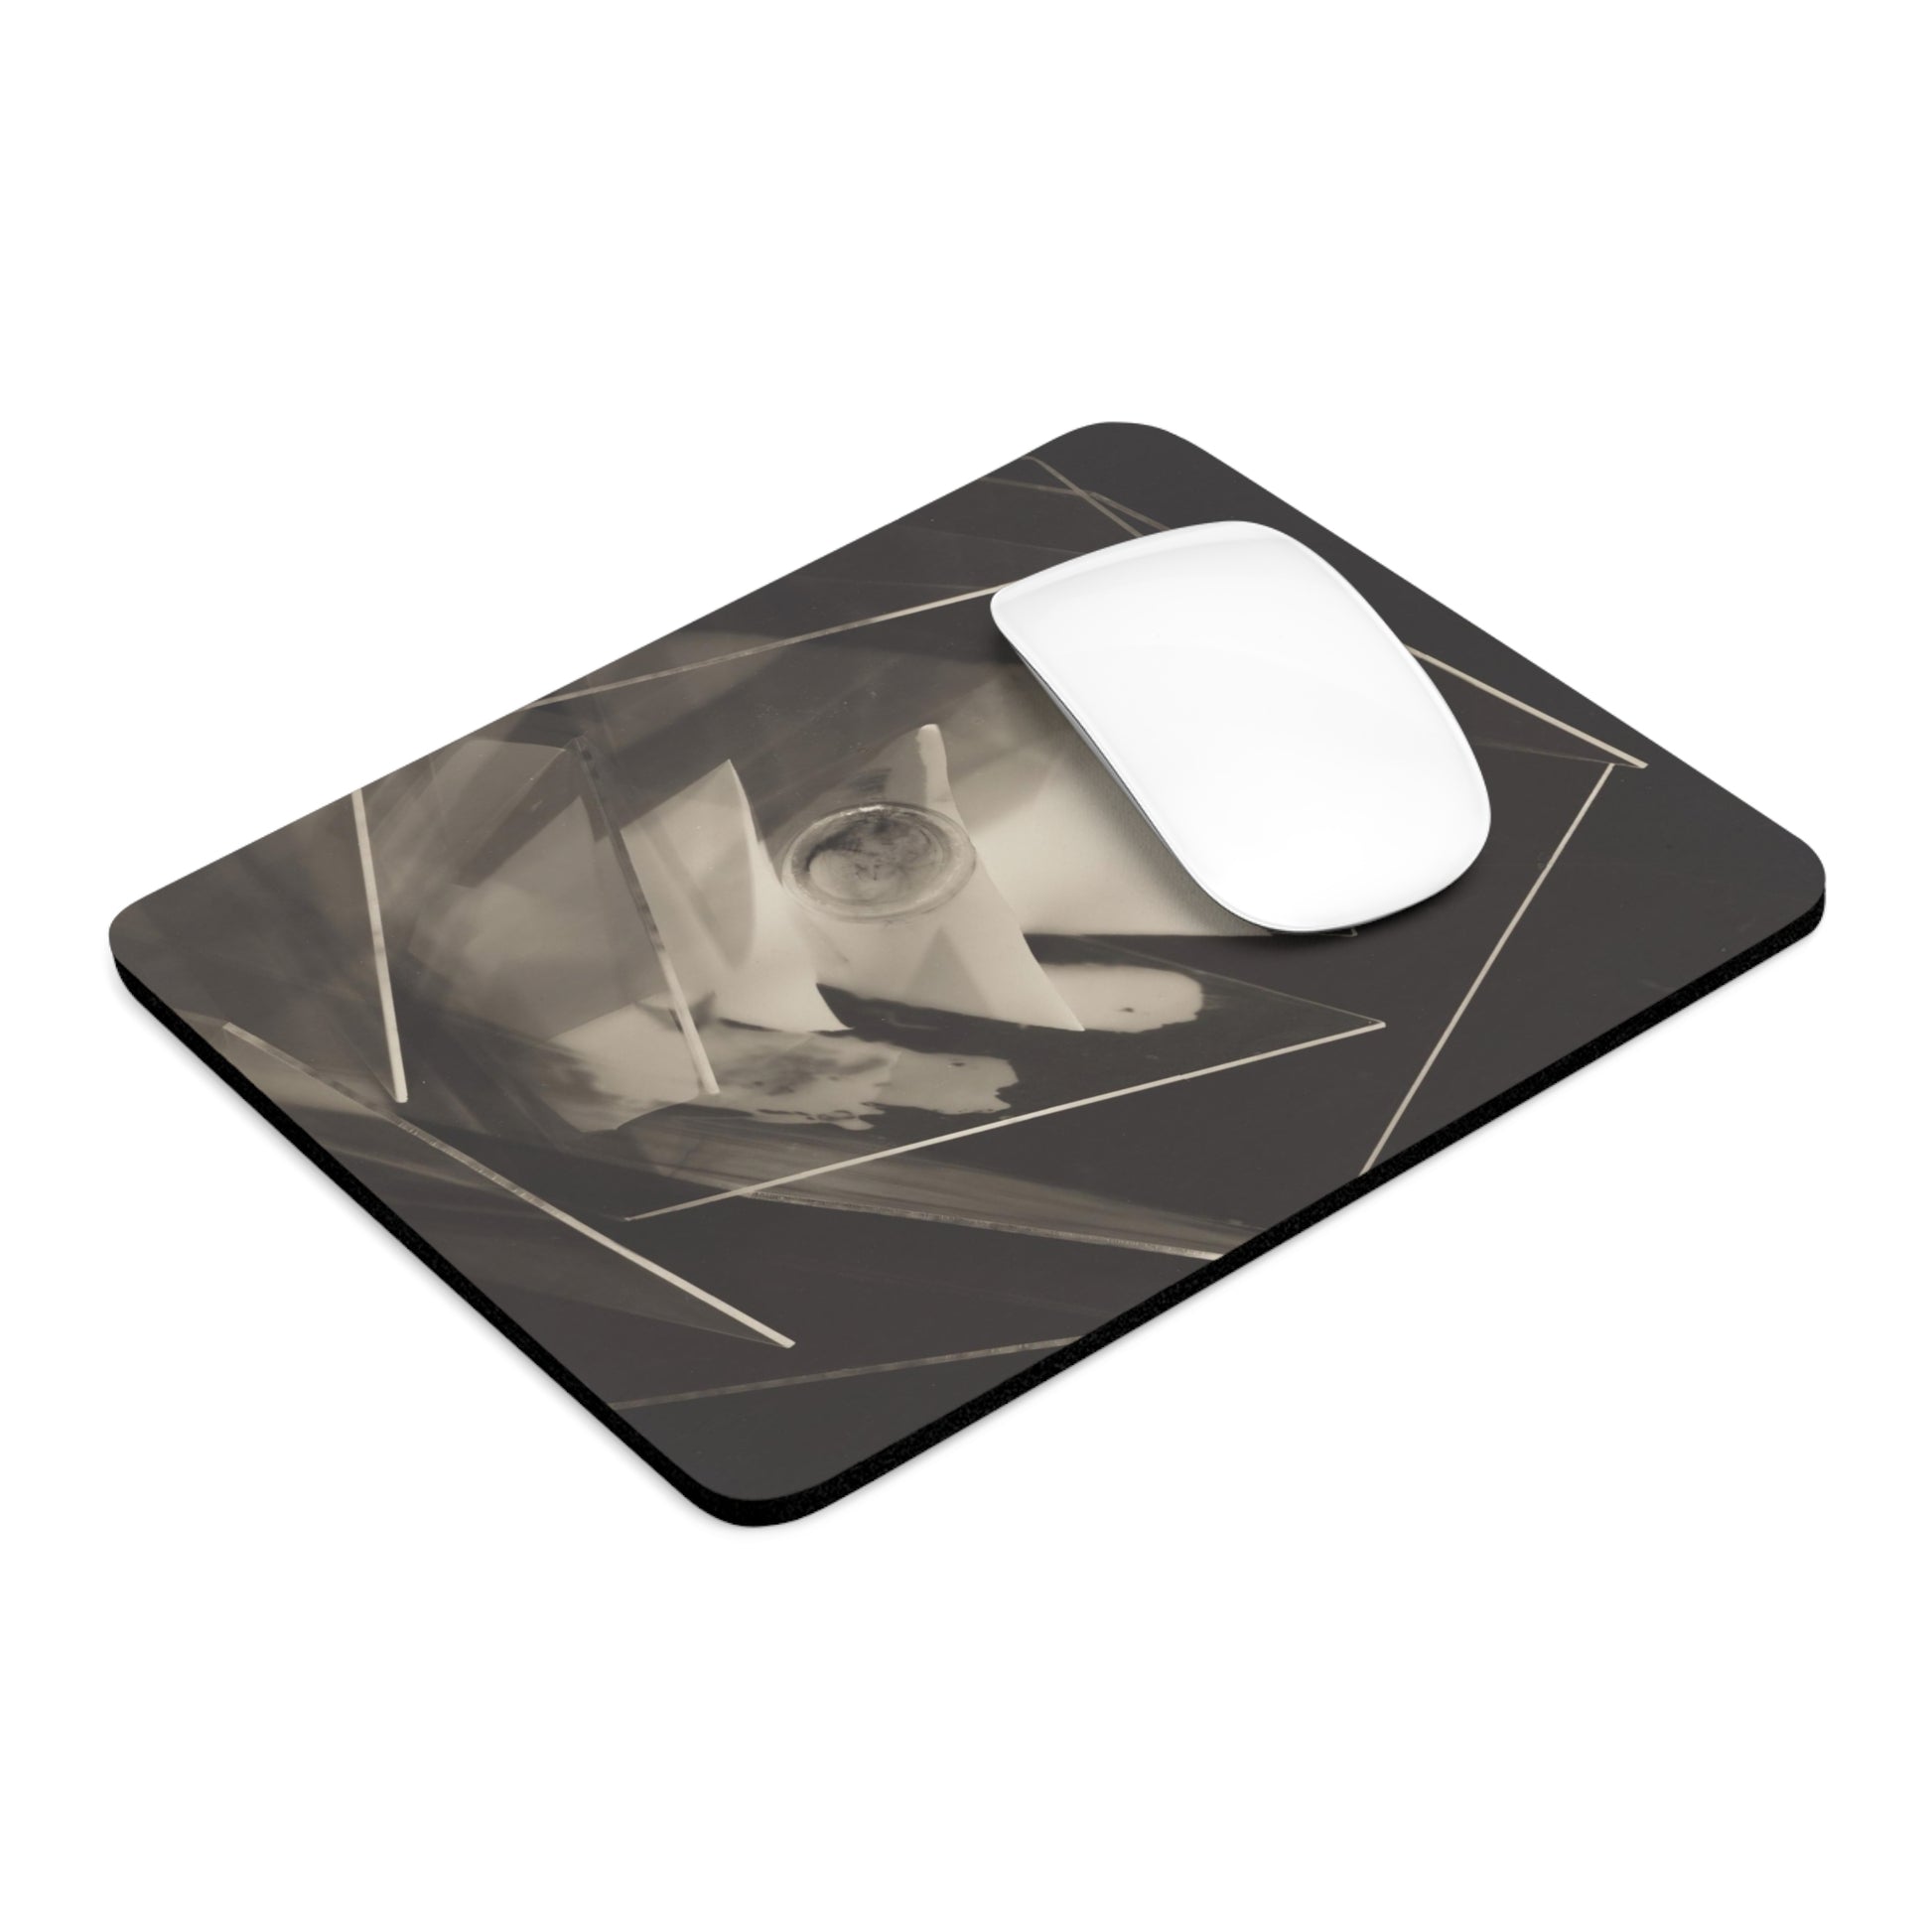 MAN RAY - AIRPLANES - ART MOUSE PAD